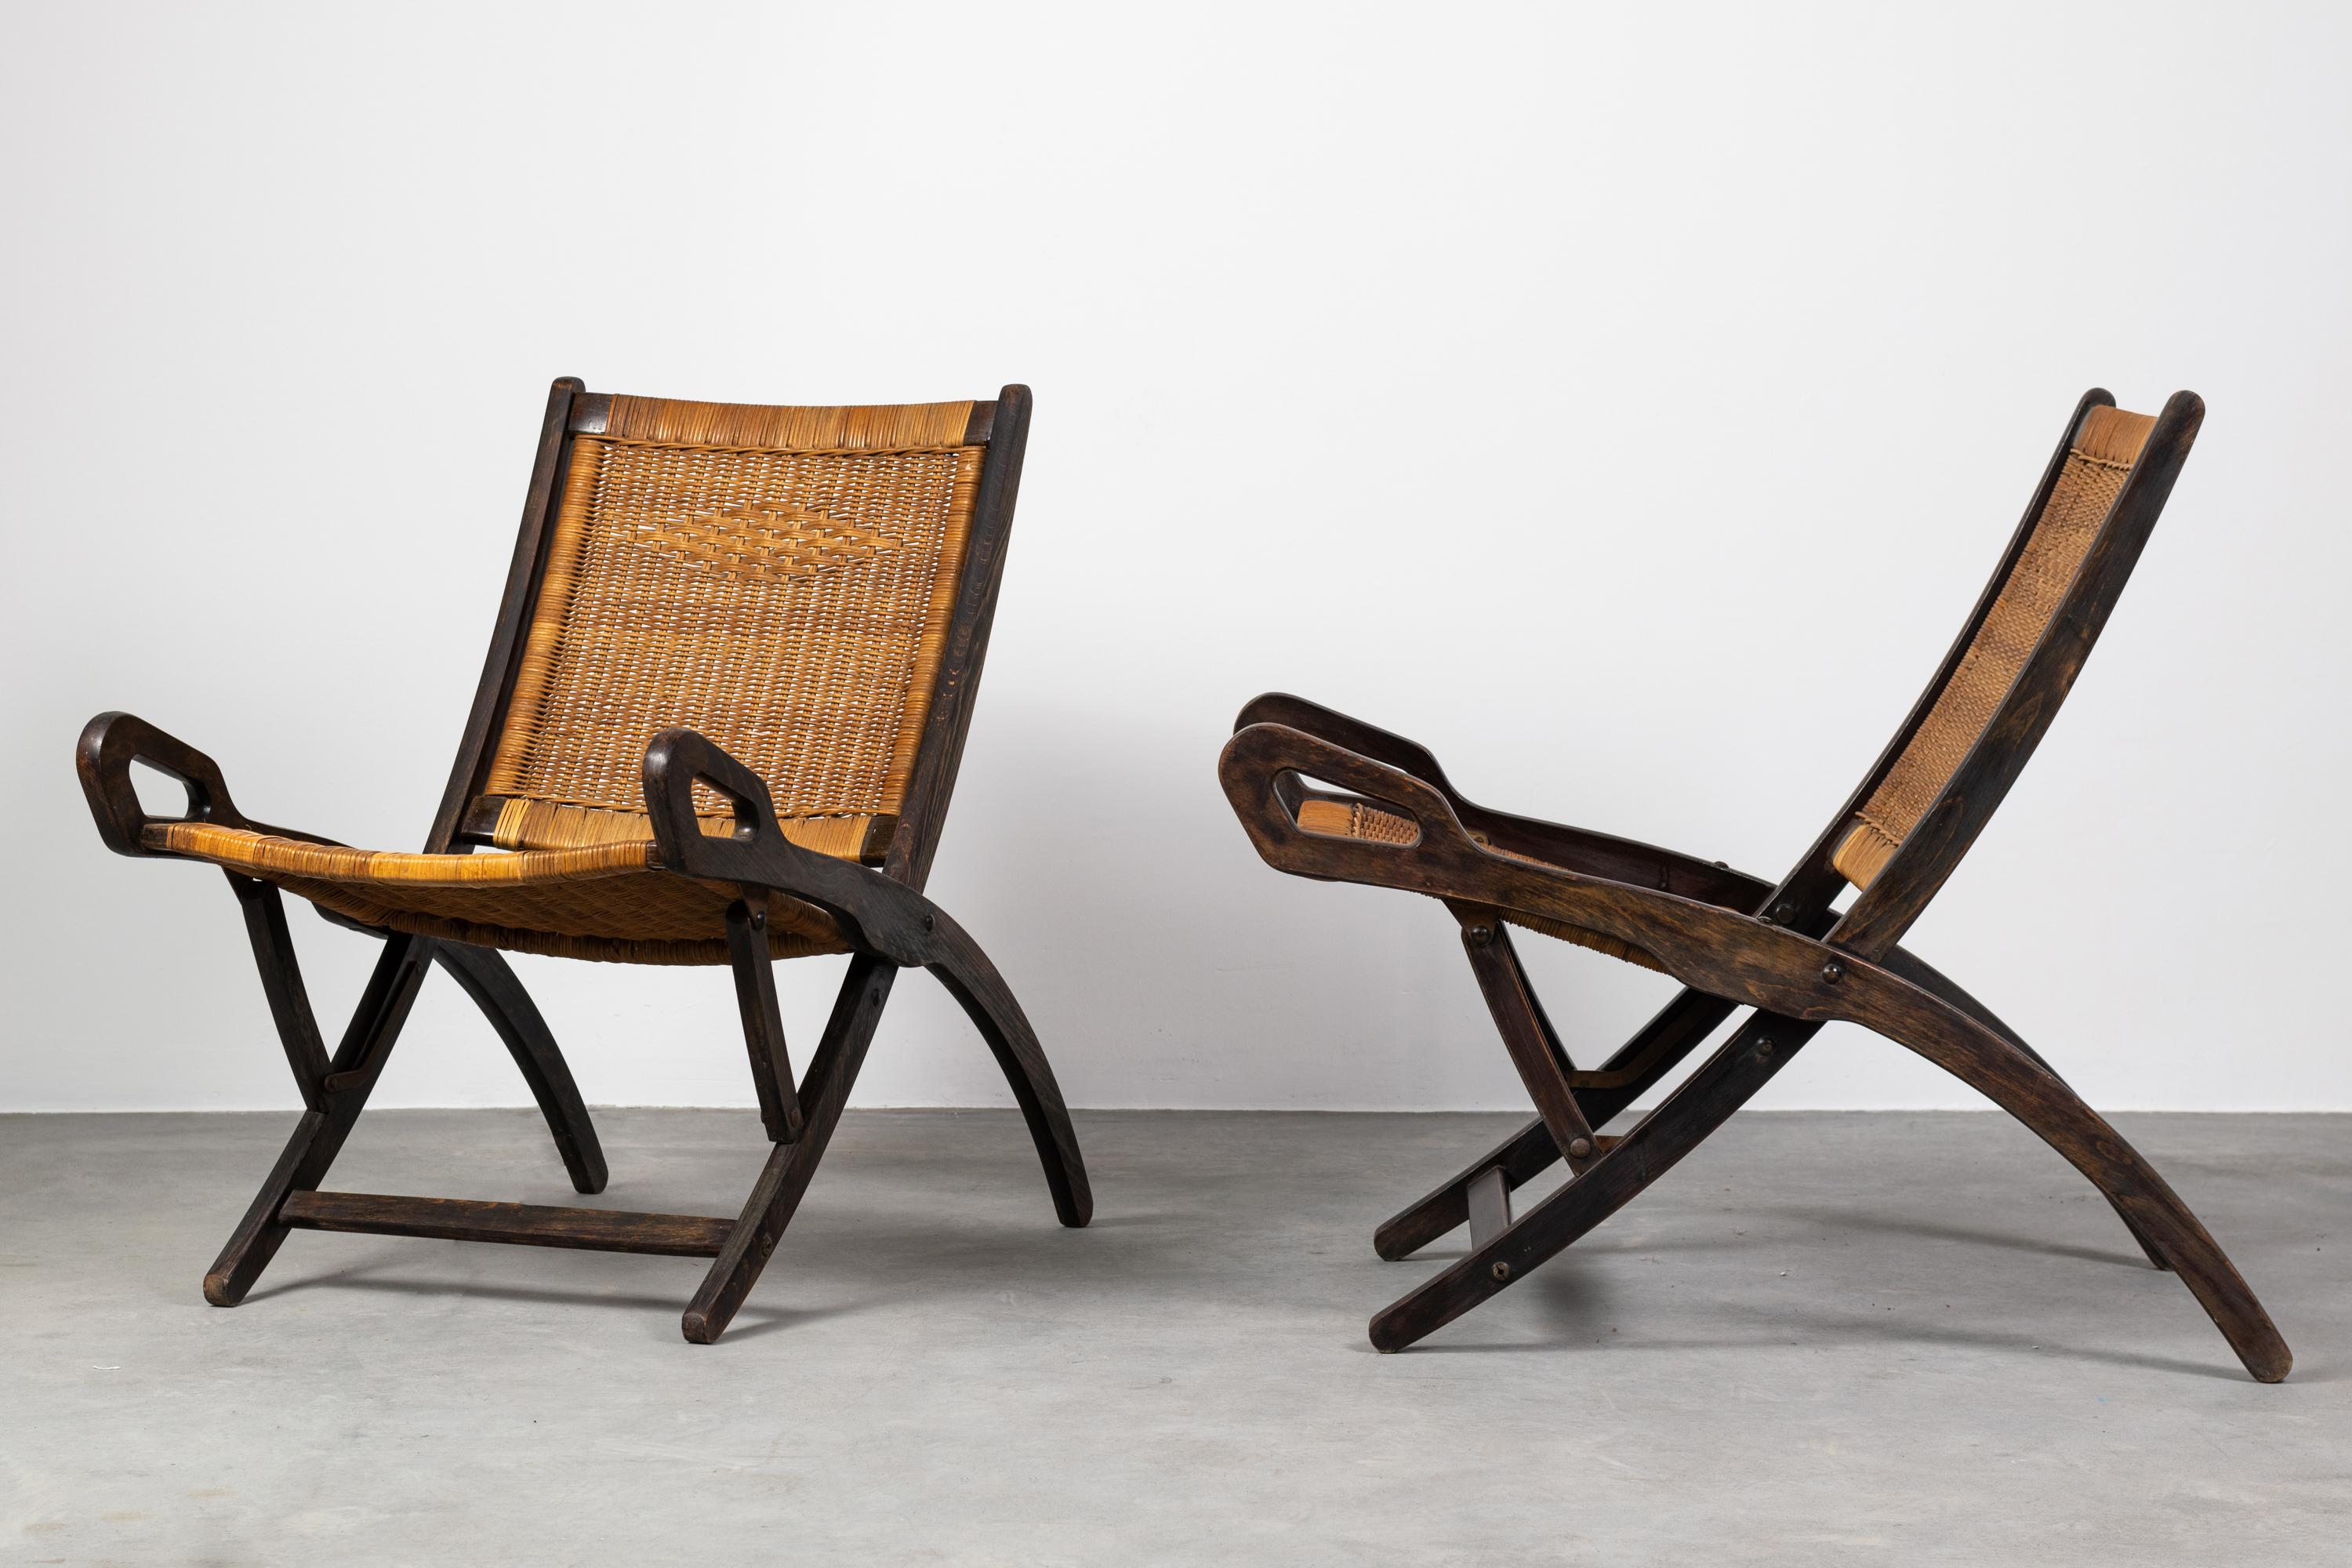 Set of two folding lounge chairs Ninfea (or Pieghevole Ninfea) with a structure in the wood, seat, and back in woven wicker and brass hinges.
The Ninfea chair was designed by Gio Ponti during the progettation of the iconic Superleggera chair and